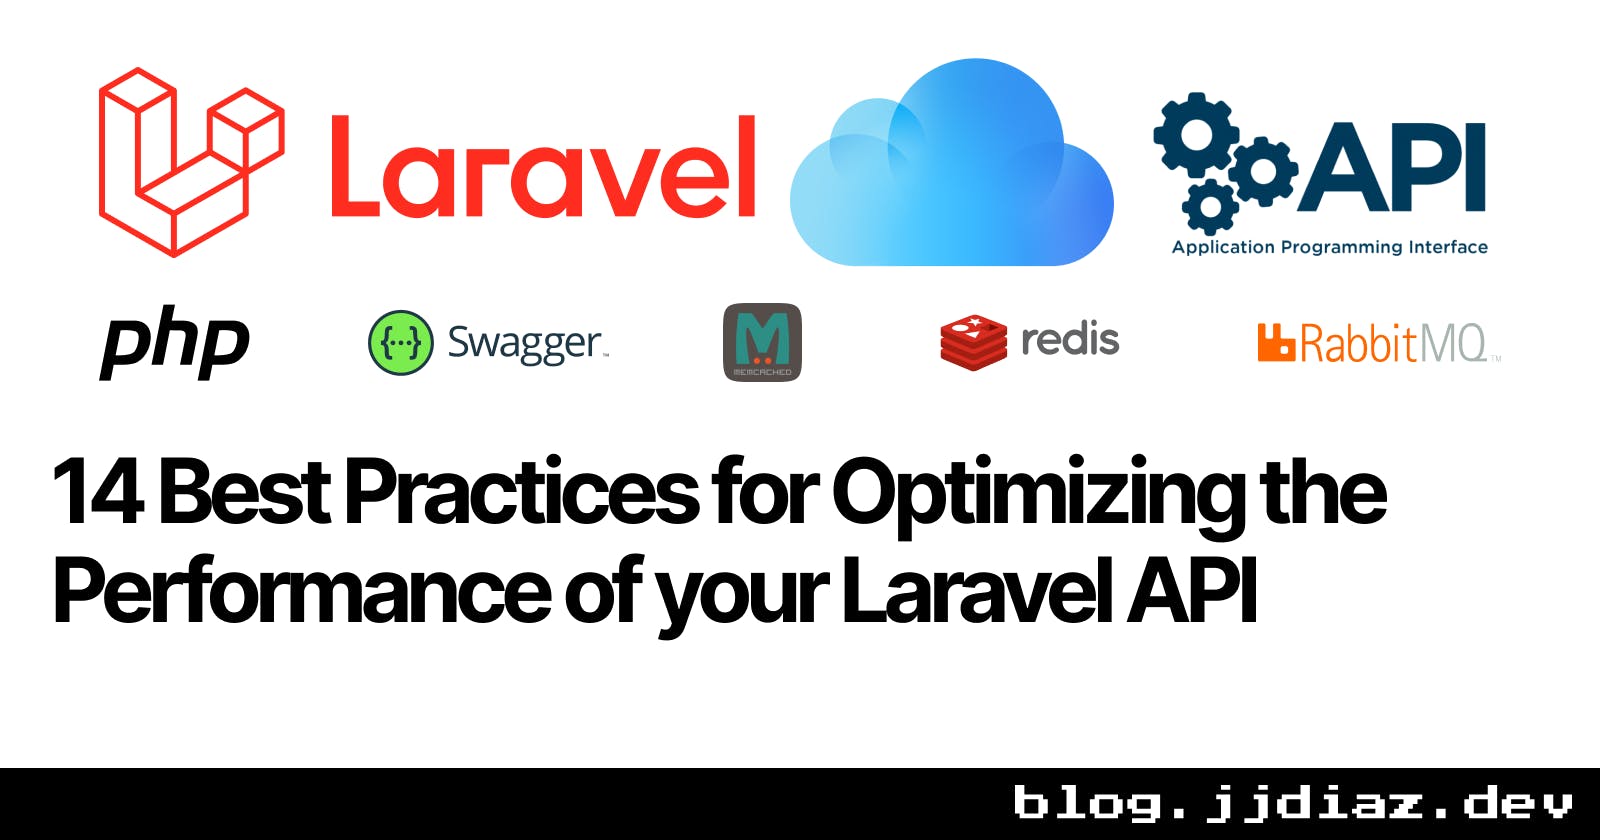 14 Best Practices for Optimizing the Performance of your Laravel API